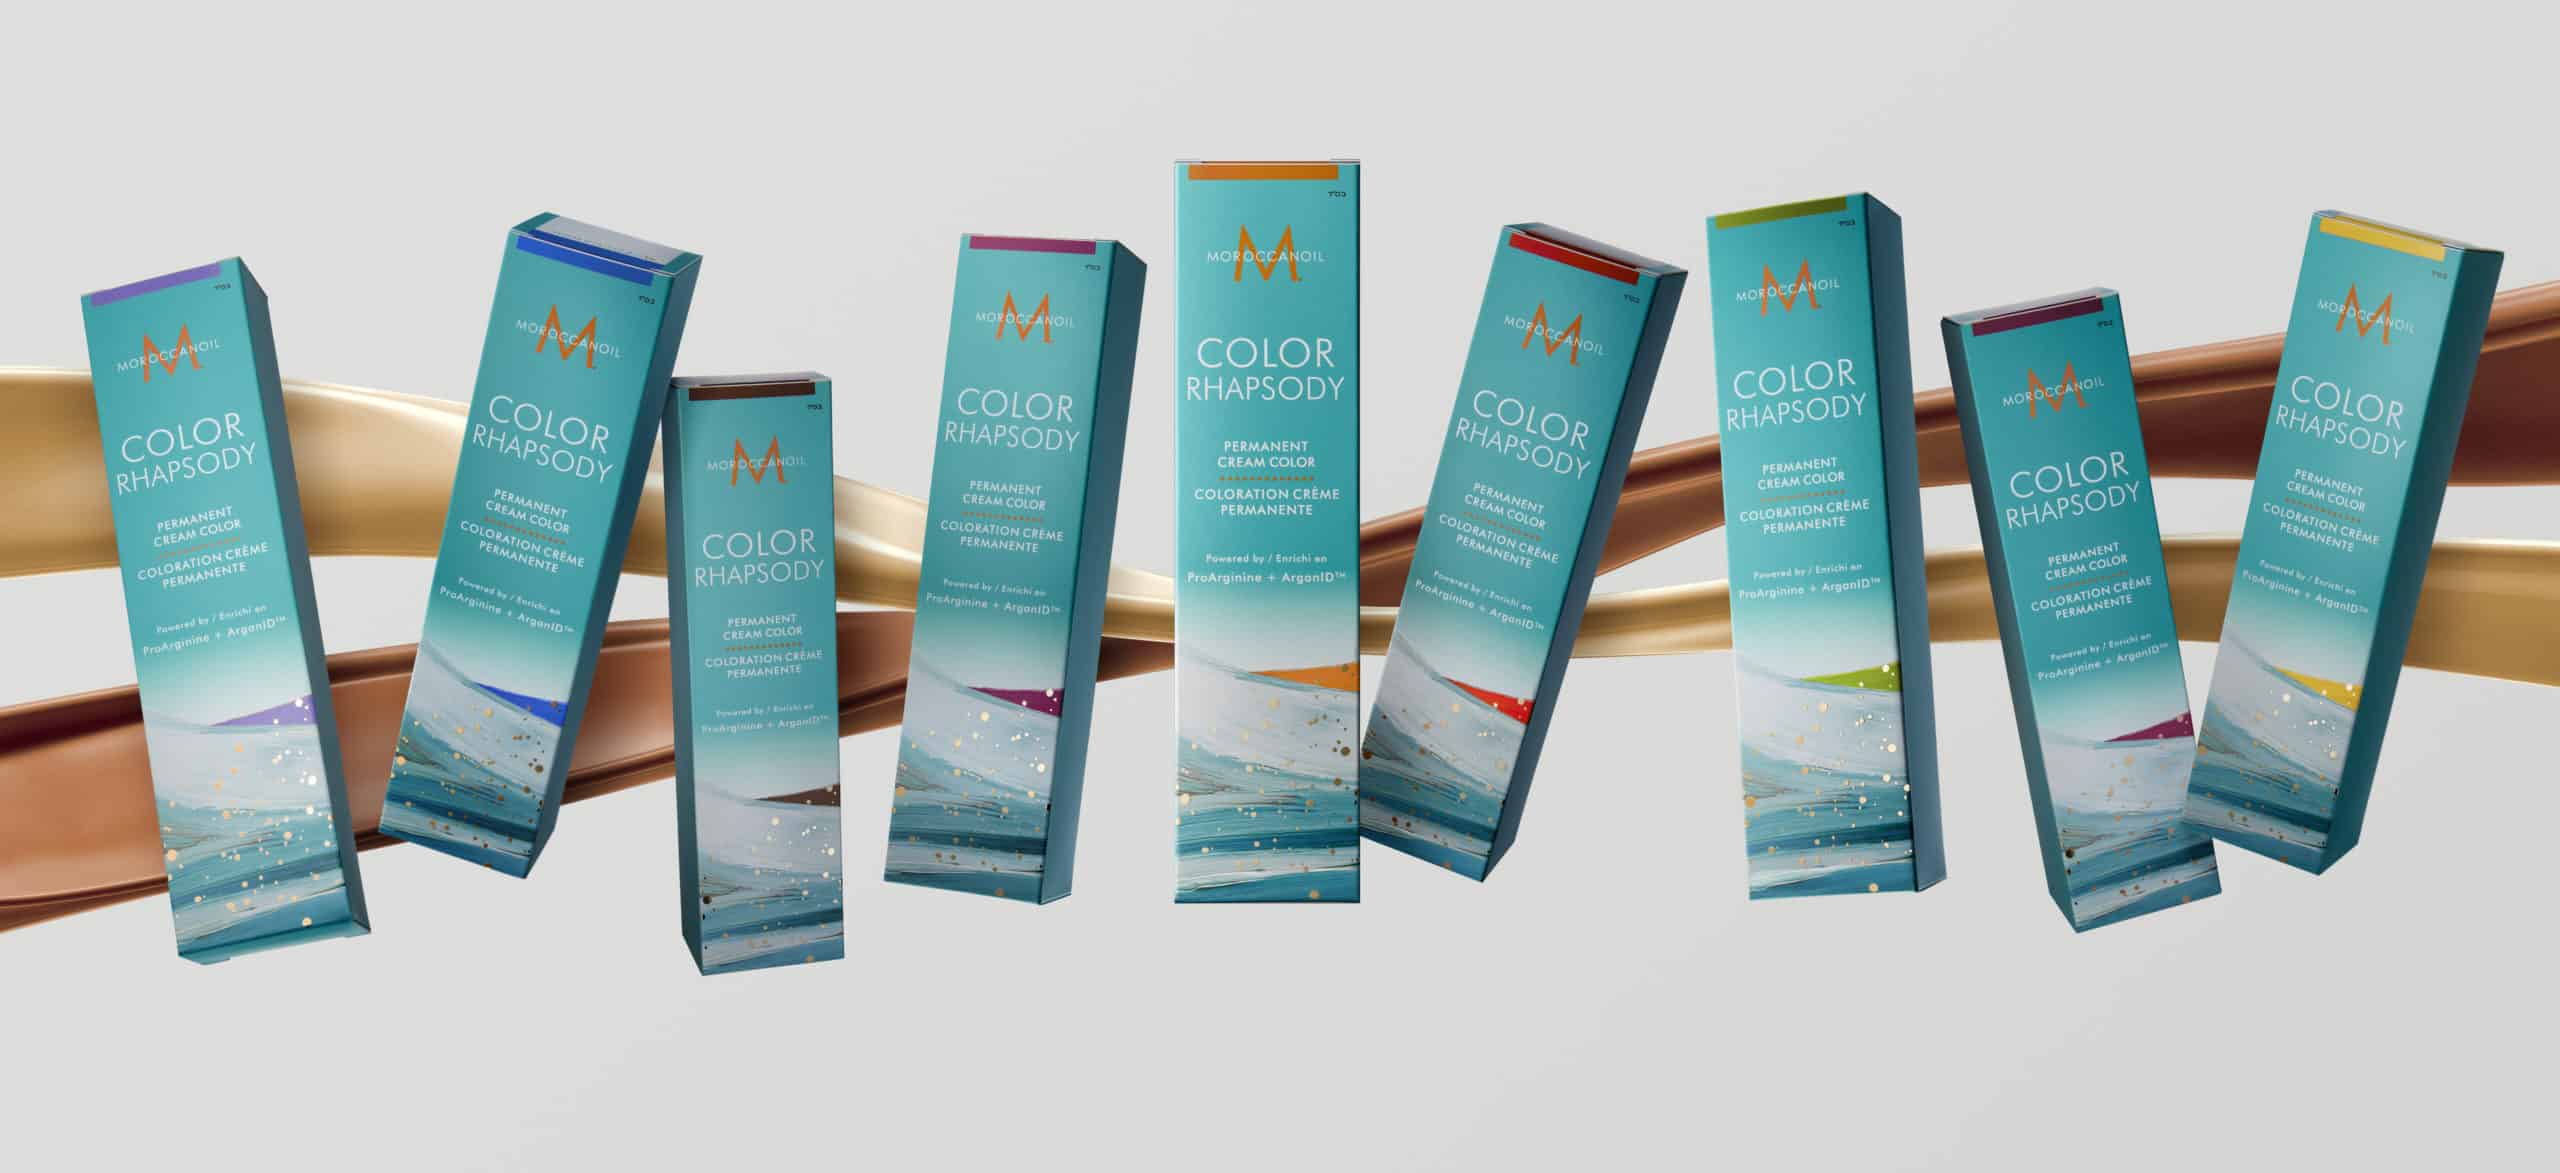 Moroccanoil Launches Professional Haircolor Collection - Daily Front Row